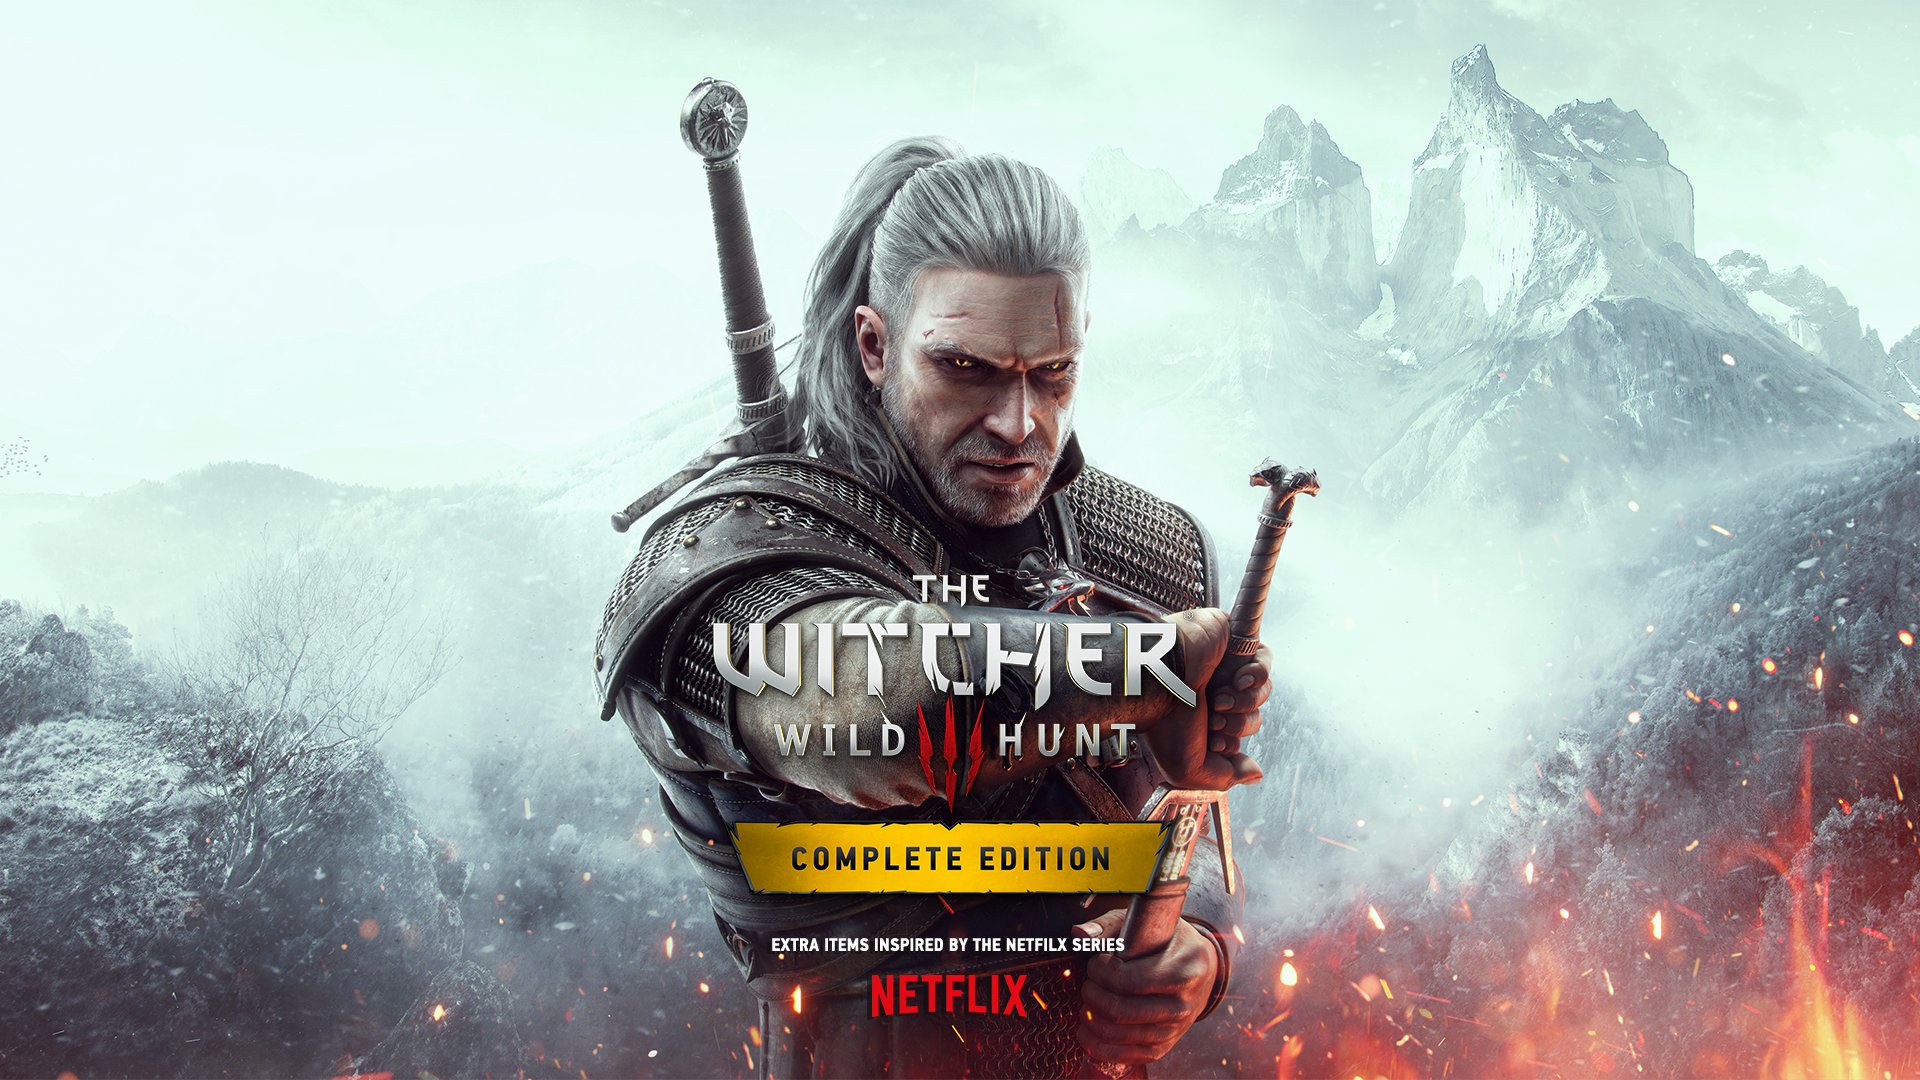 The Witcher 3 Wild Hunt Complete Edition Artwork